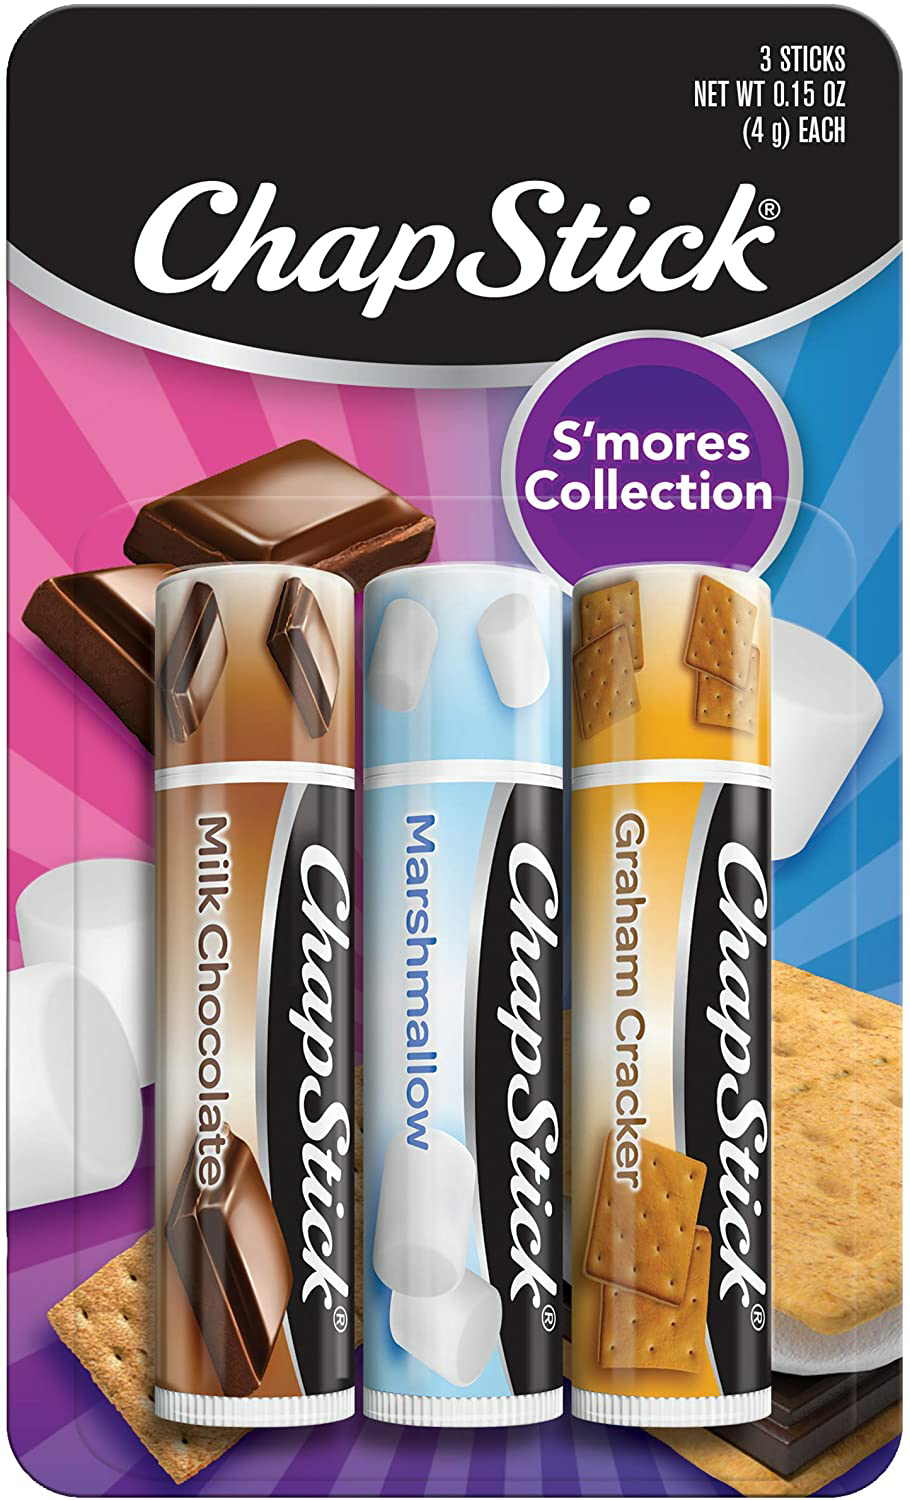 ChapStick S'mores Collection Graham Cracker, Marshmallow and Milk Chocolate Flavored Lip Balm Tubes Variety Pack, Lip Care - 0.15 Oz (Pack of 3) : Beauty & Personal Car $1.80